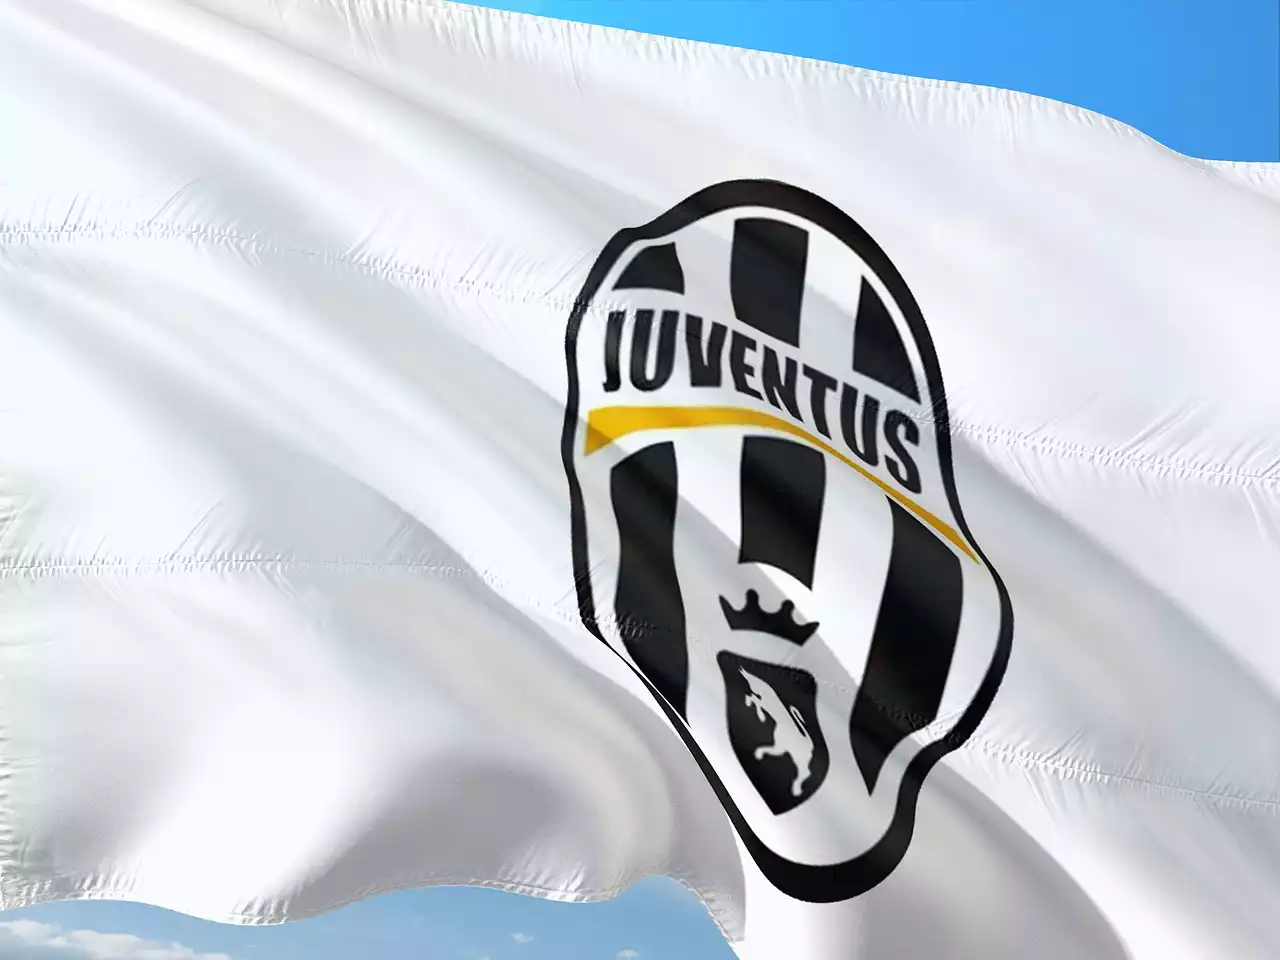 Club Cultures: The Core Identity of Serie A Teams